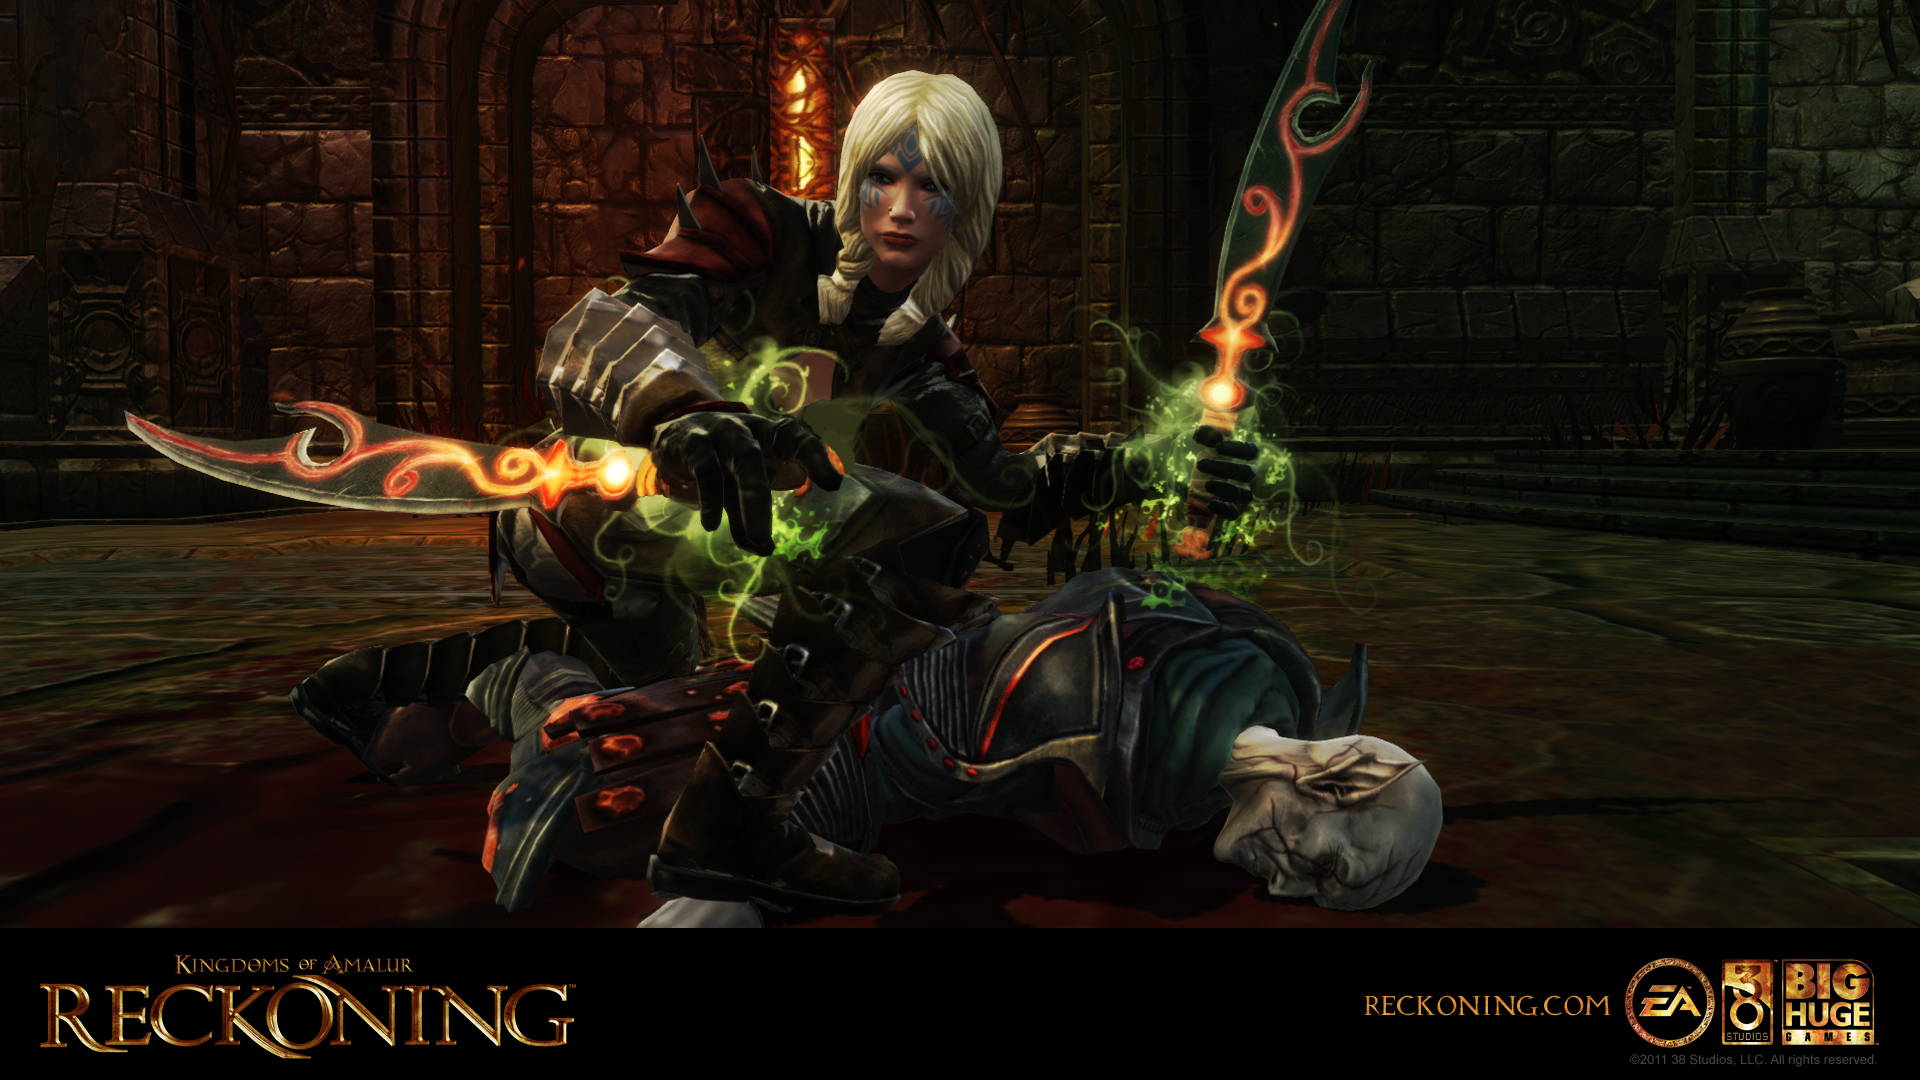 Wallpapers from Kingdoms of Amalur: Reckoning 